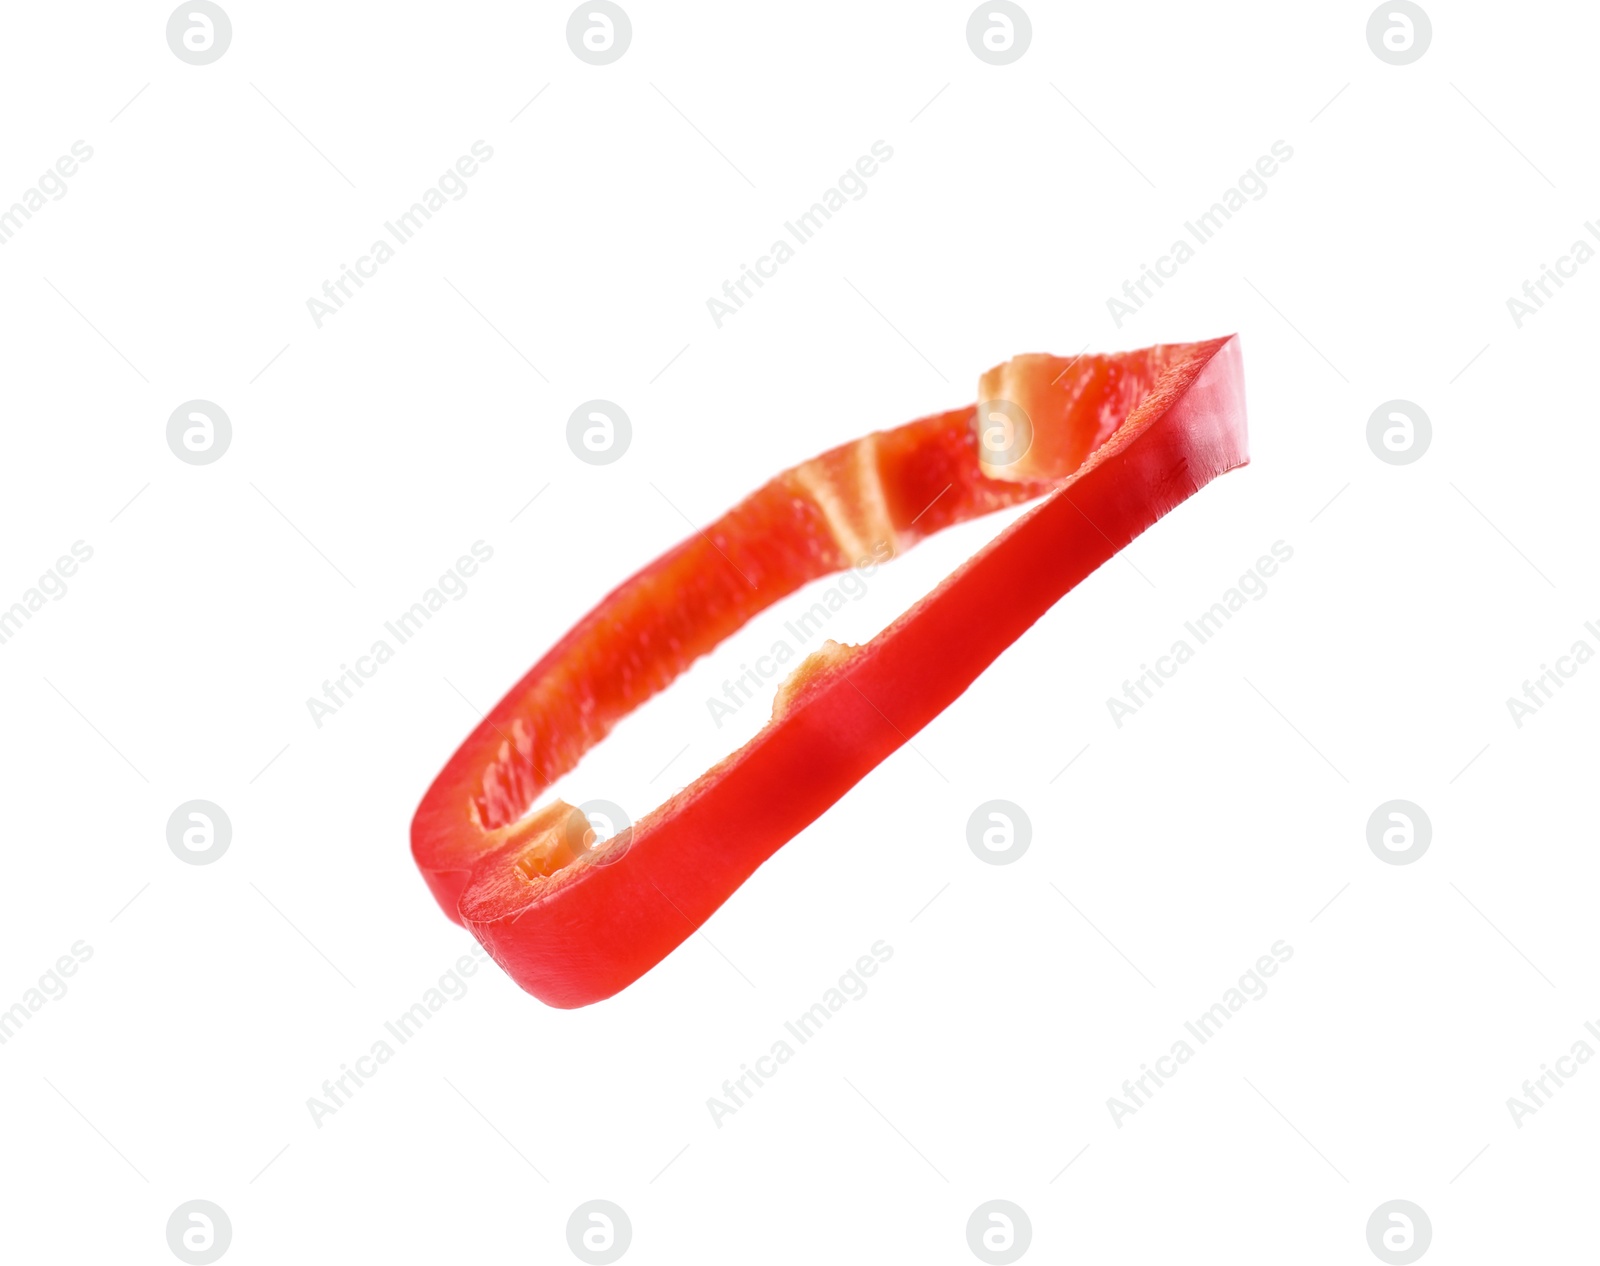 Photo of Slice of ripe red bell pepper isolated on white